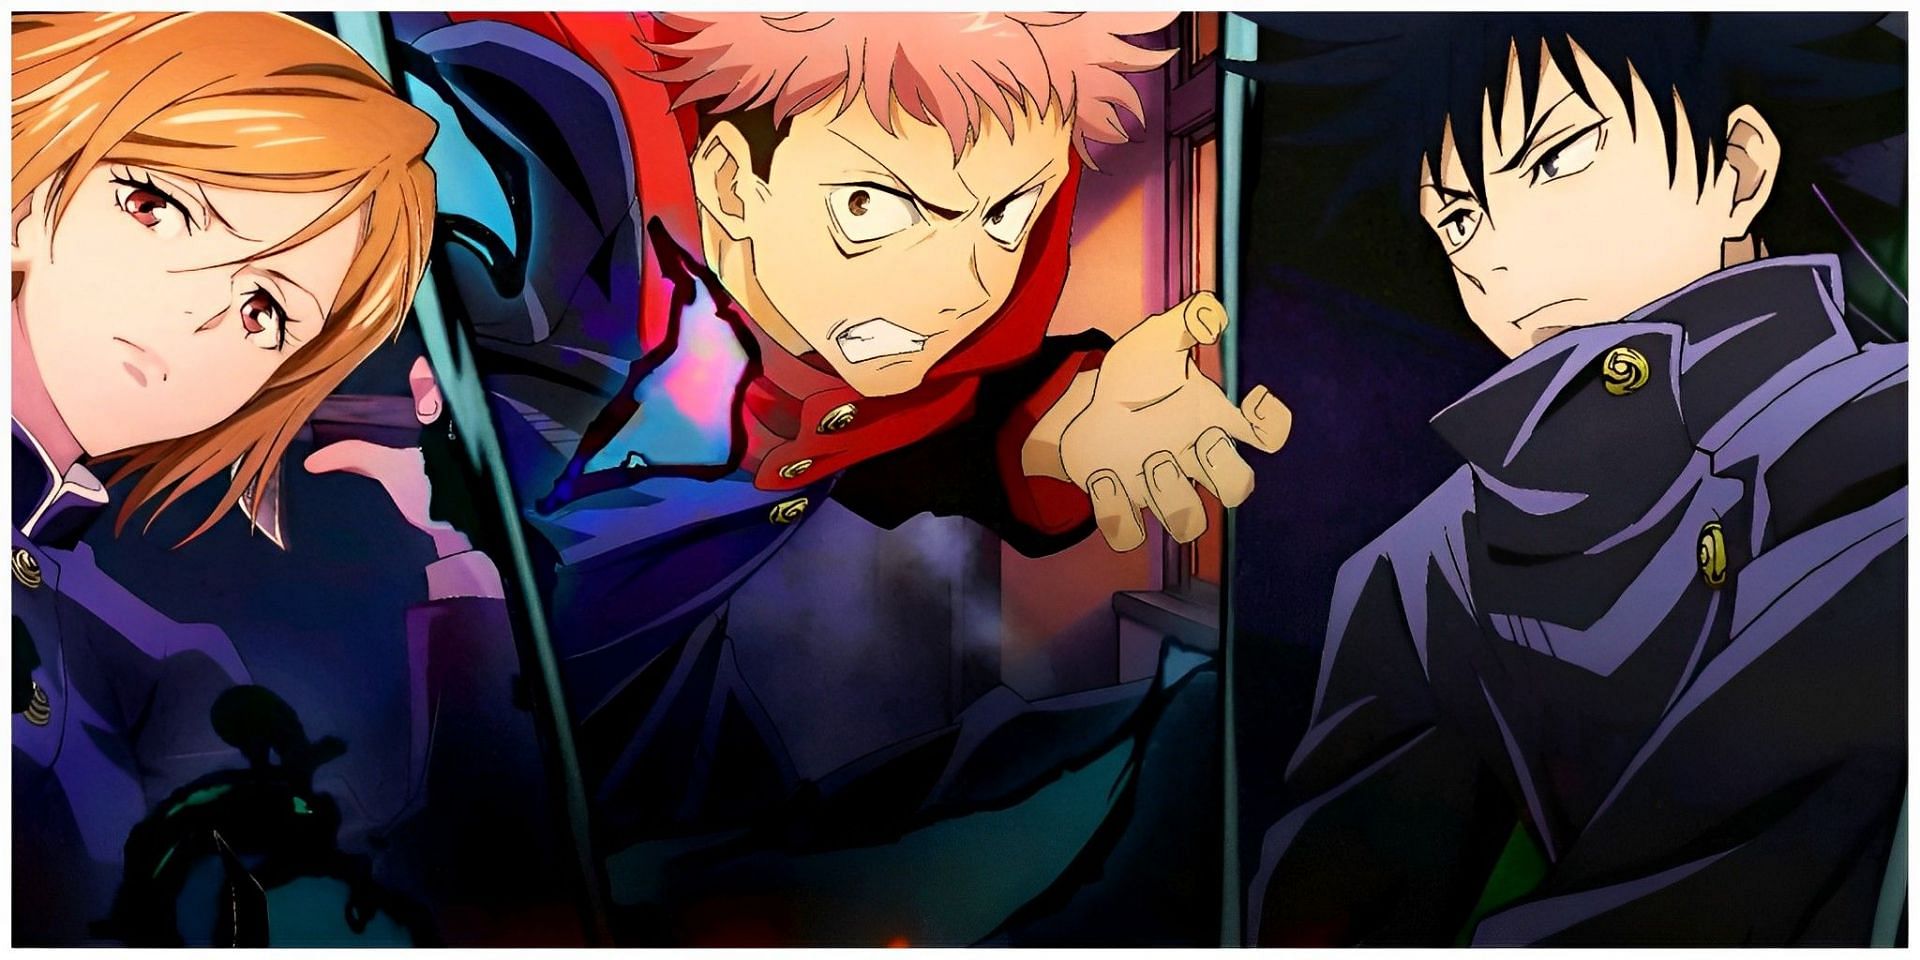 Jujutsu Kaisen 21 Strongest Characters So Far in Anime Ranked  Beebom